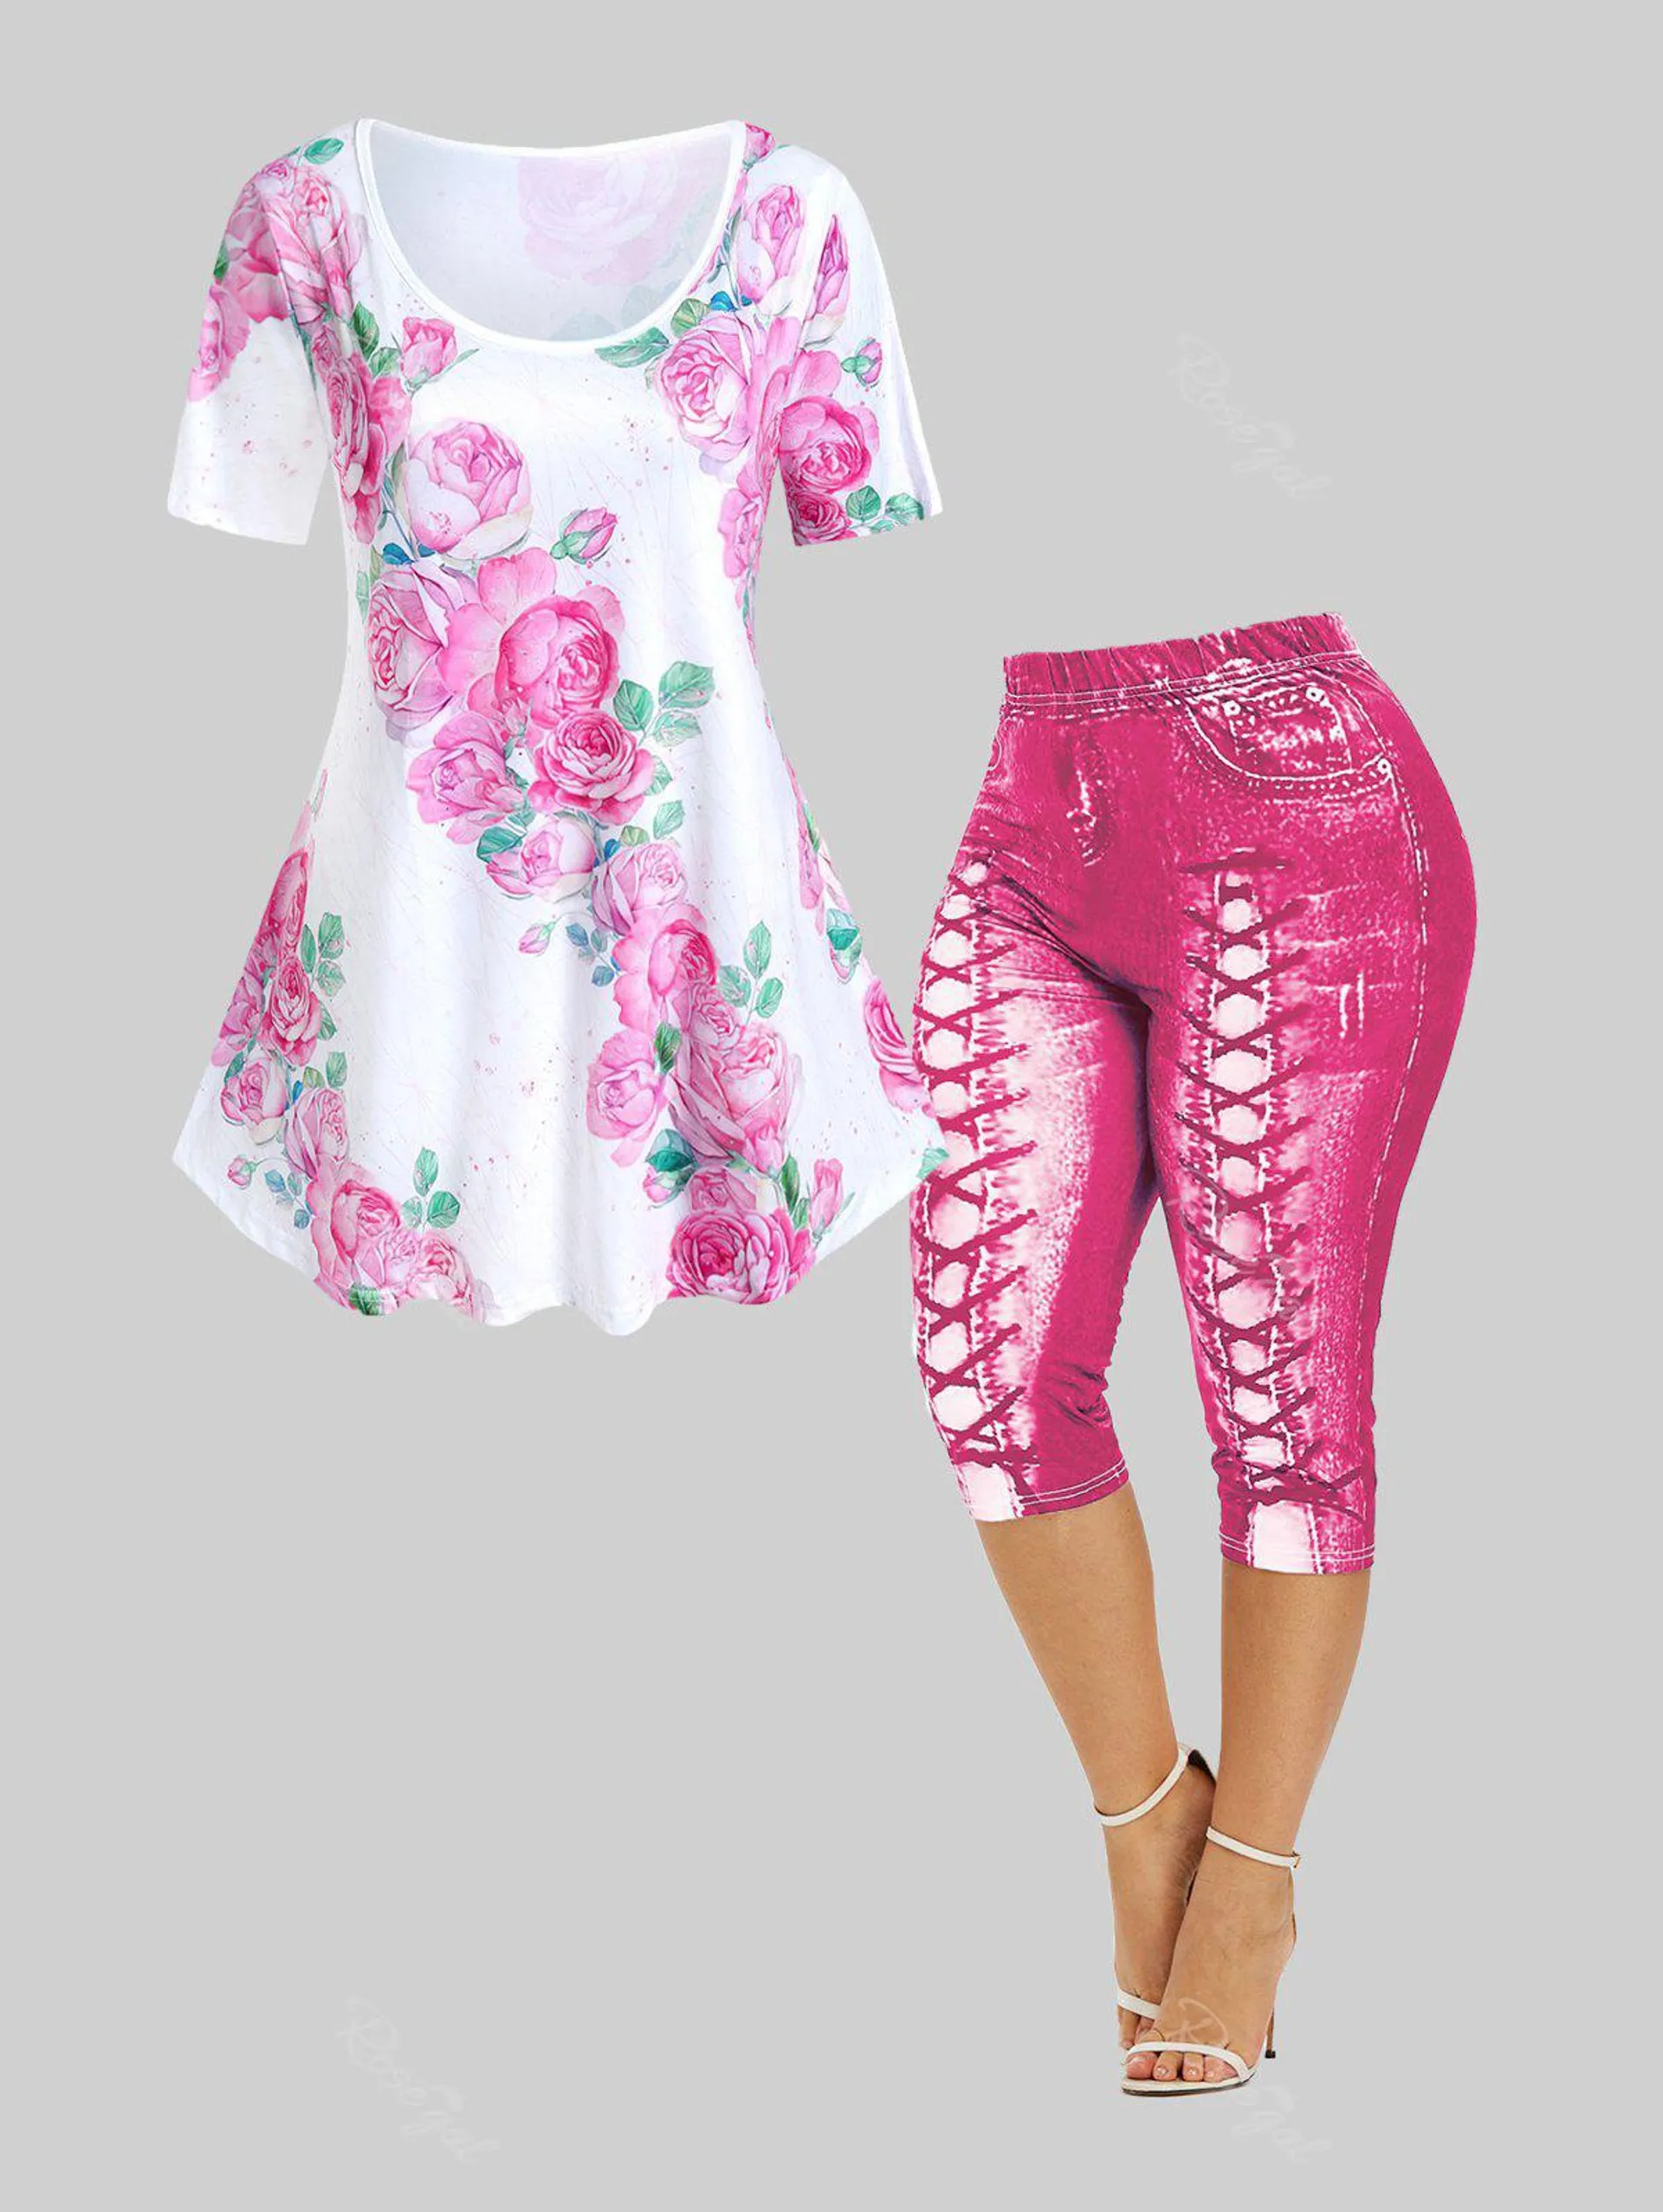 Floral Tee and 3D Lace Up Jean Print Capri Leggings Plus Size Summer Outfit